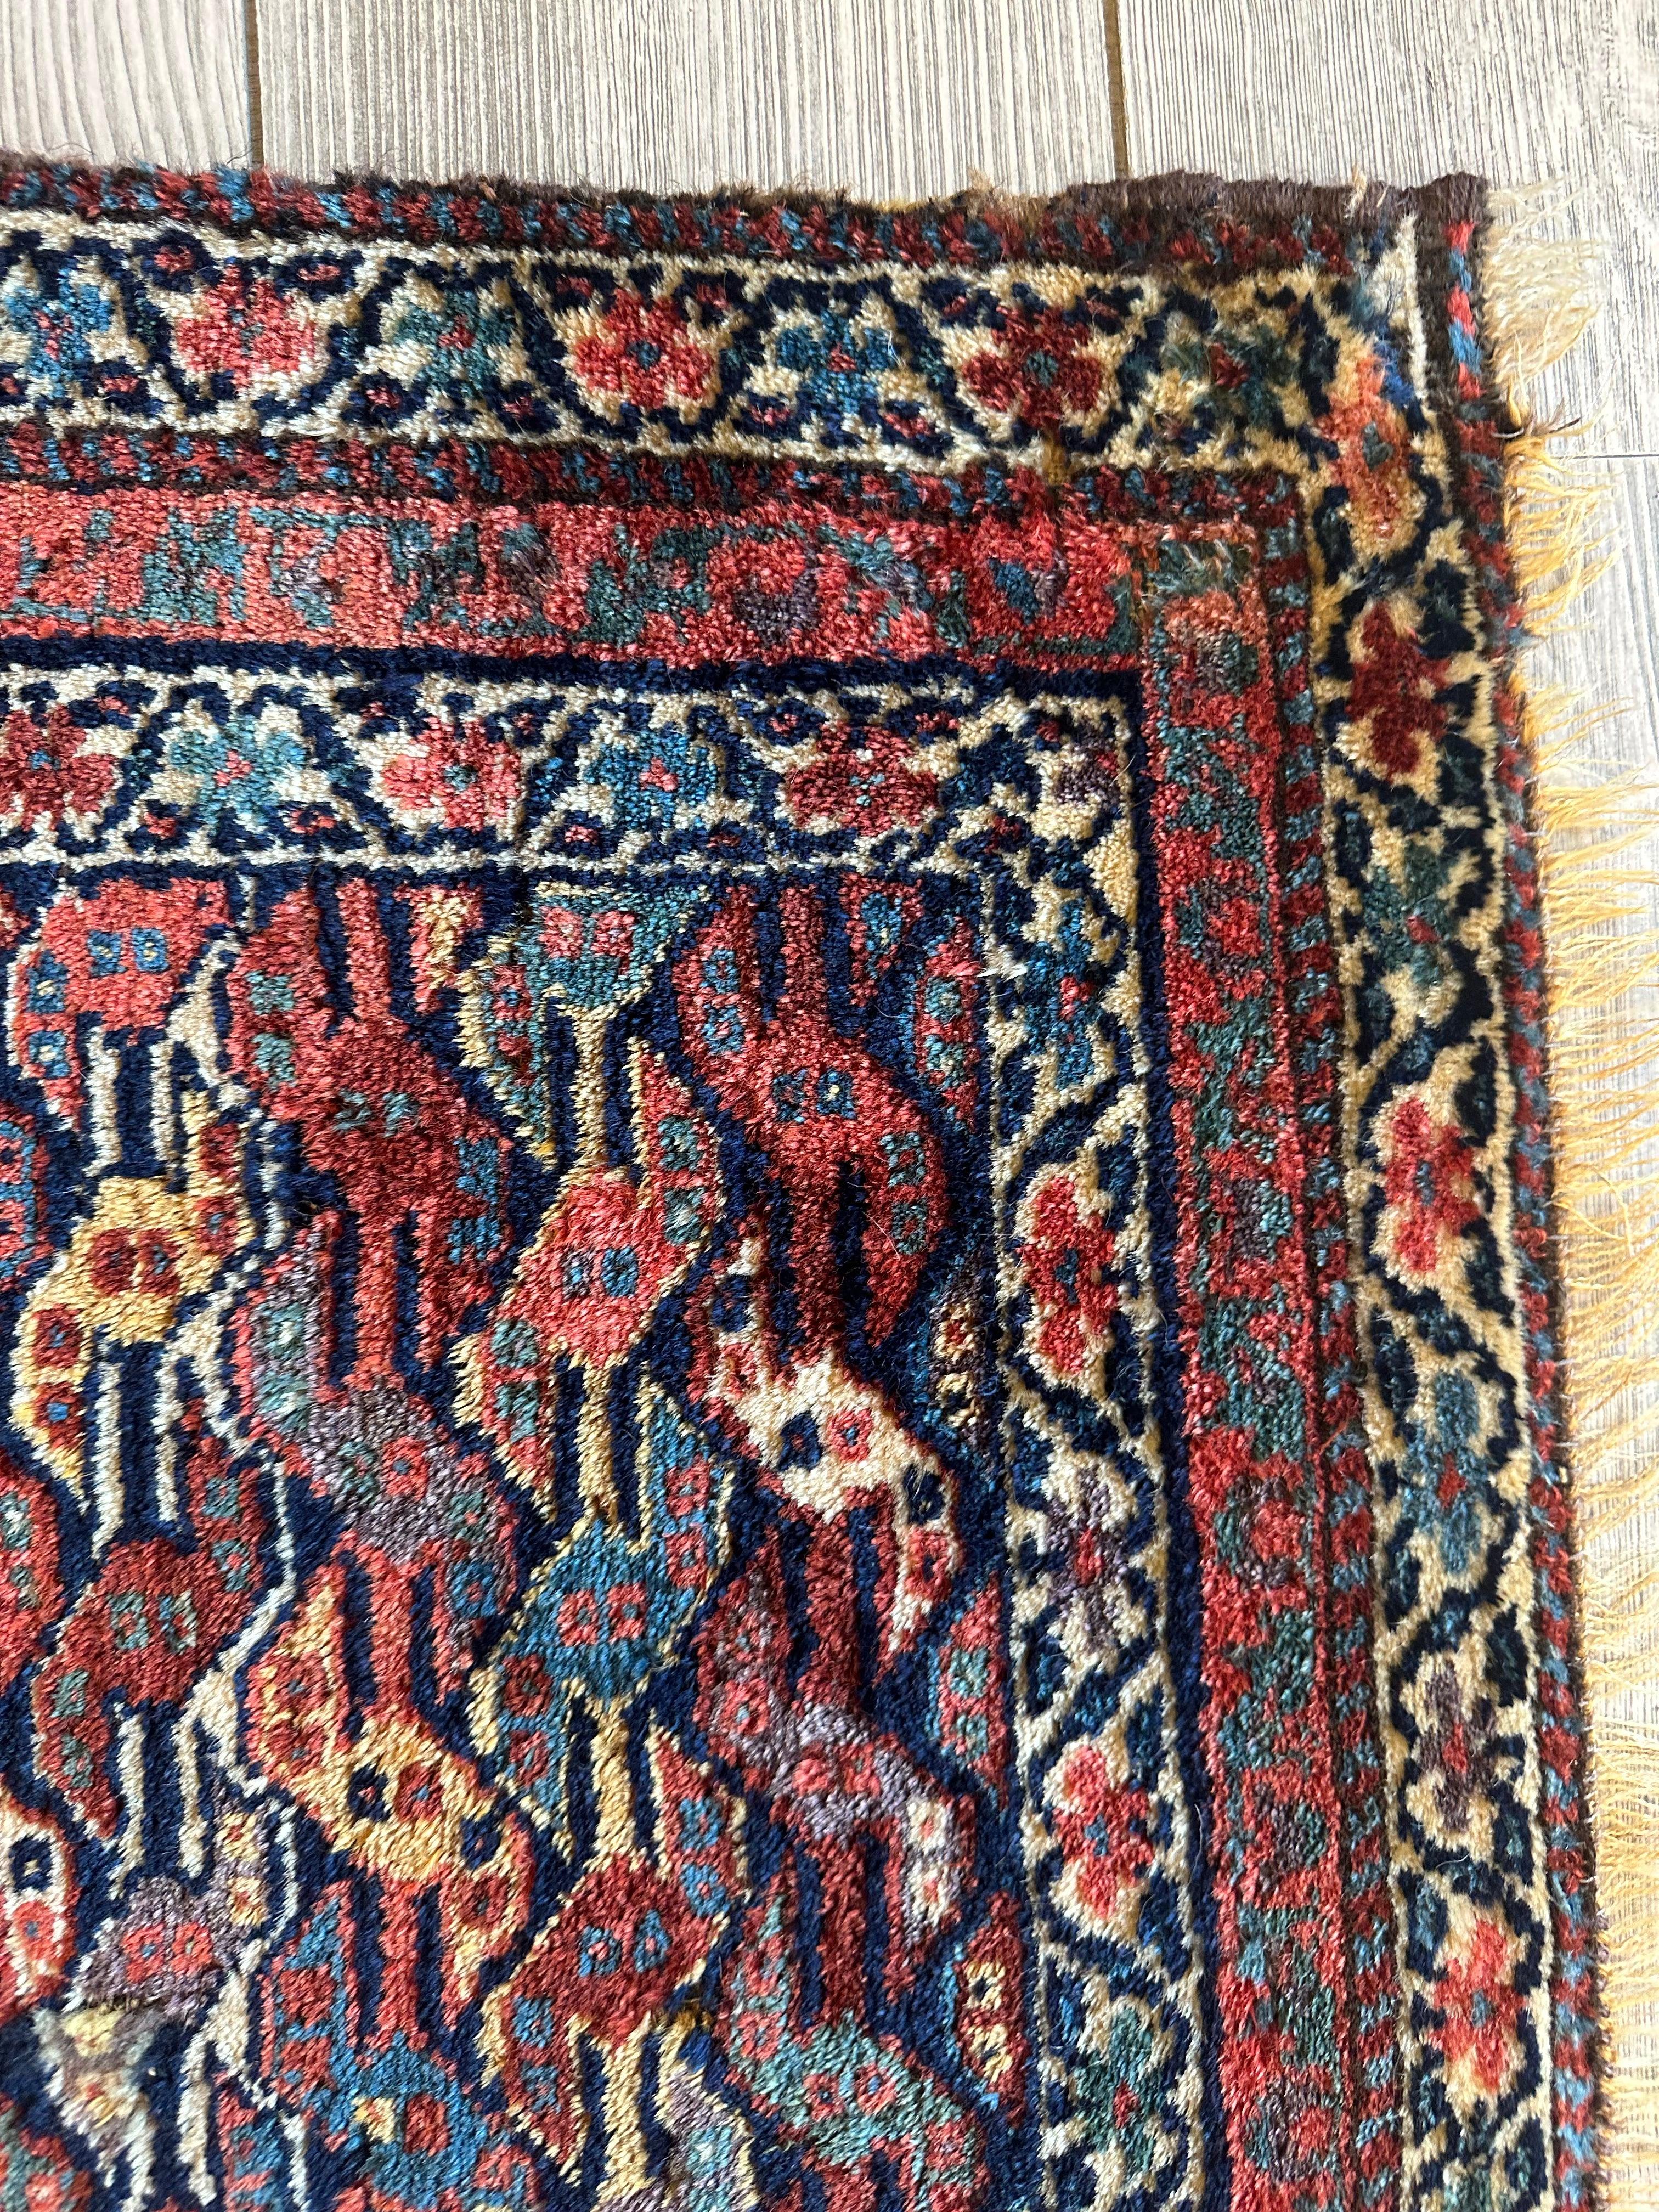 Antique Natural Dyes Small Kurdish Square Decorative Hanging Rug - 22" X 24"